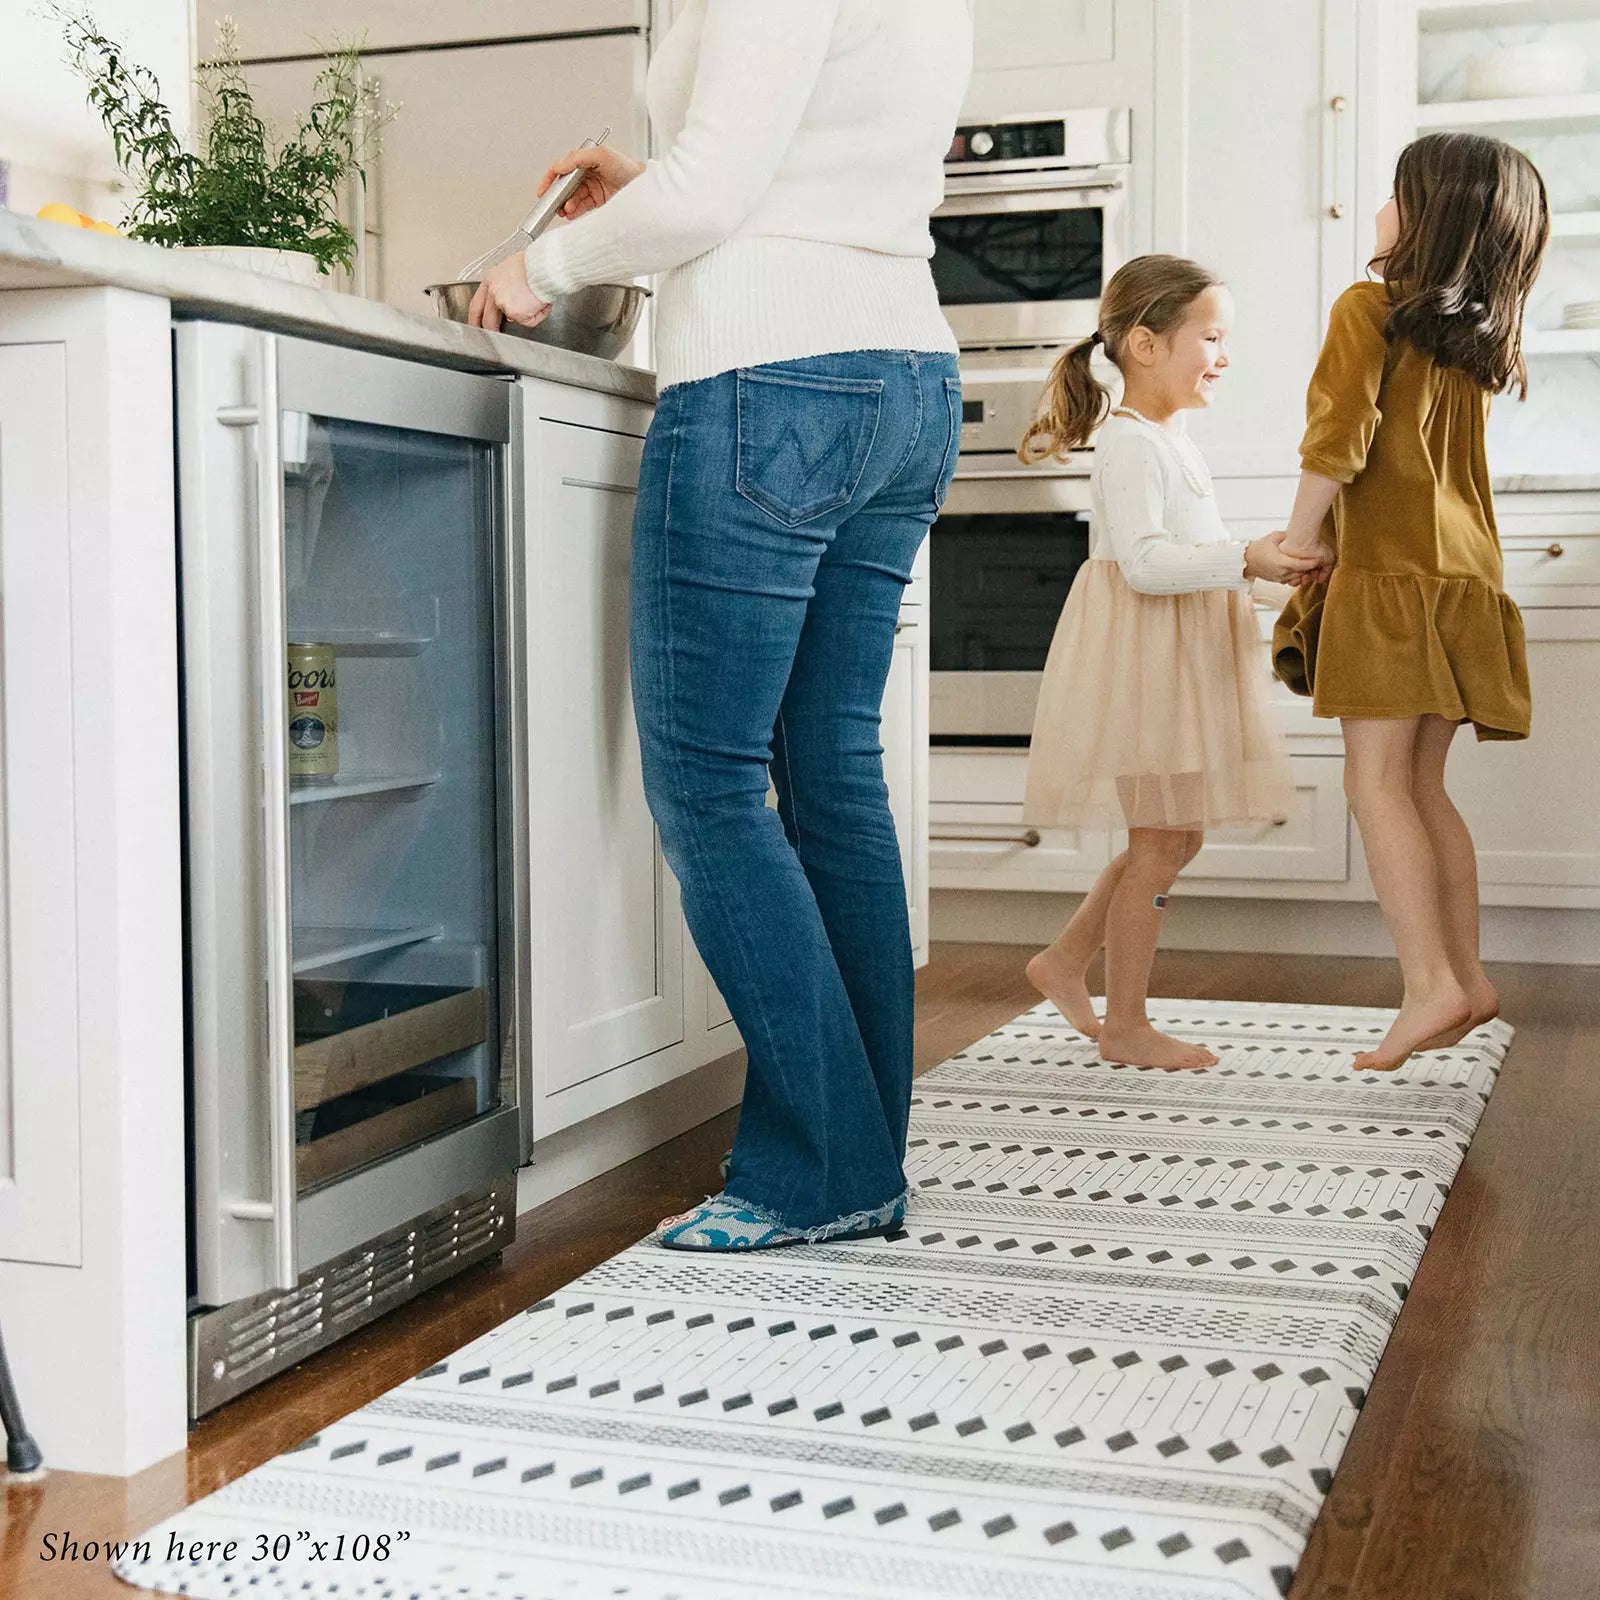 Nordique Slate Black and White Boho Nordic Print Standing Mat in kitchen with woman cooking and kids playing